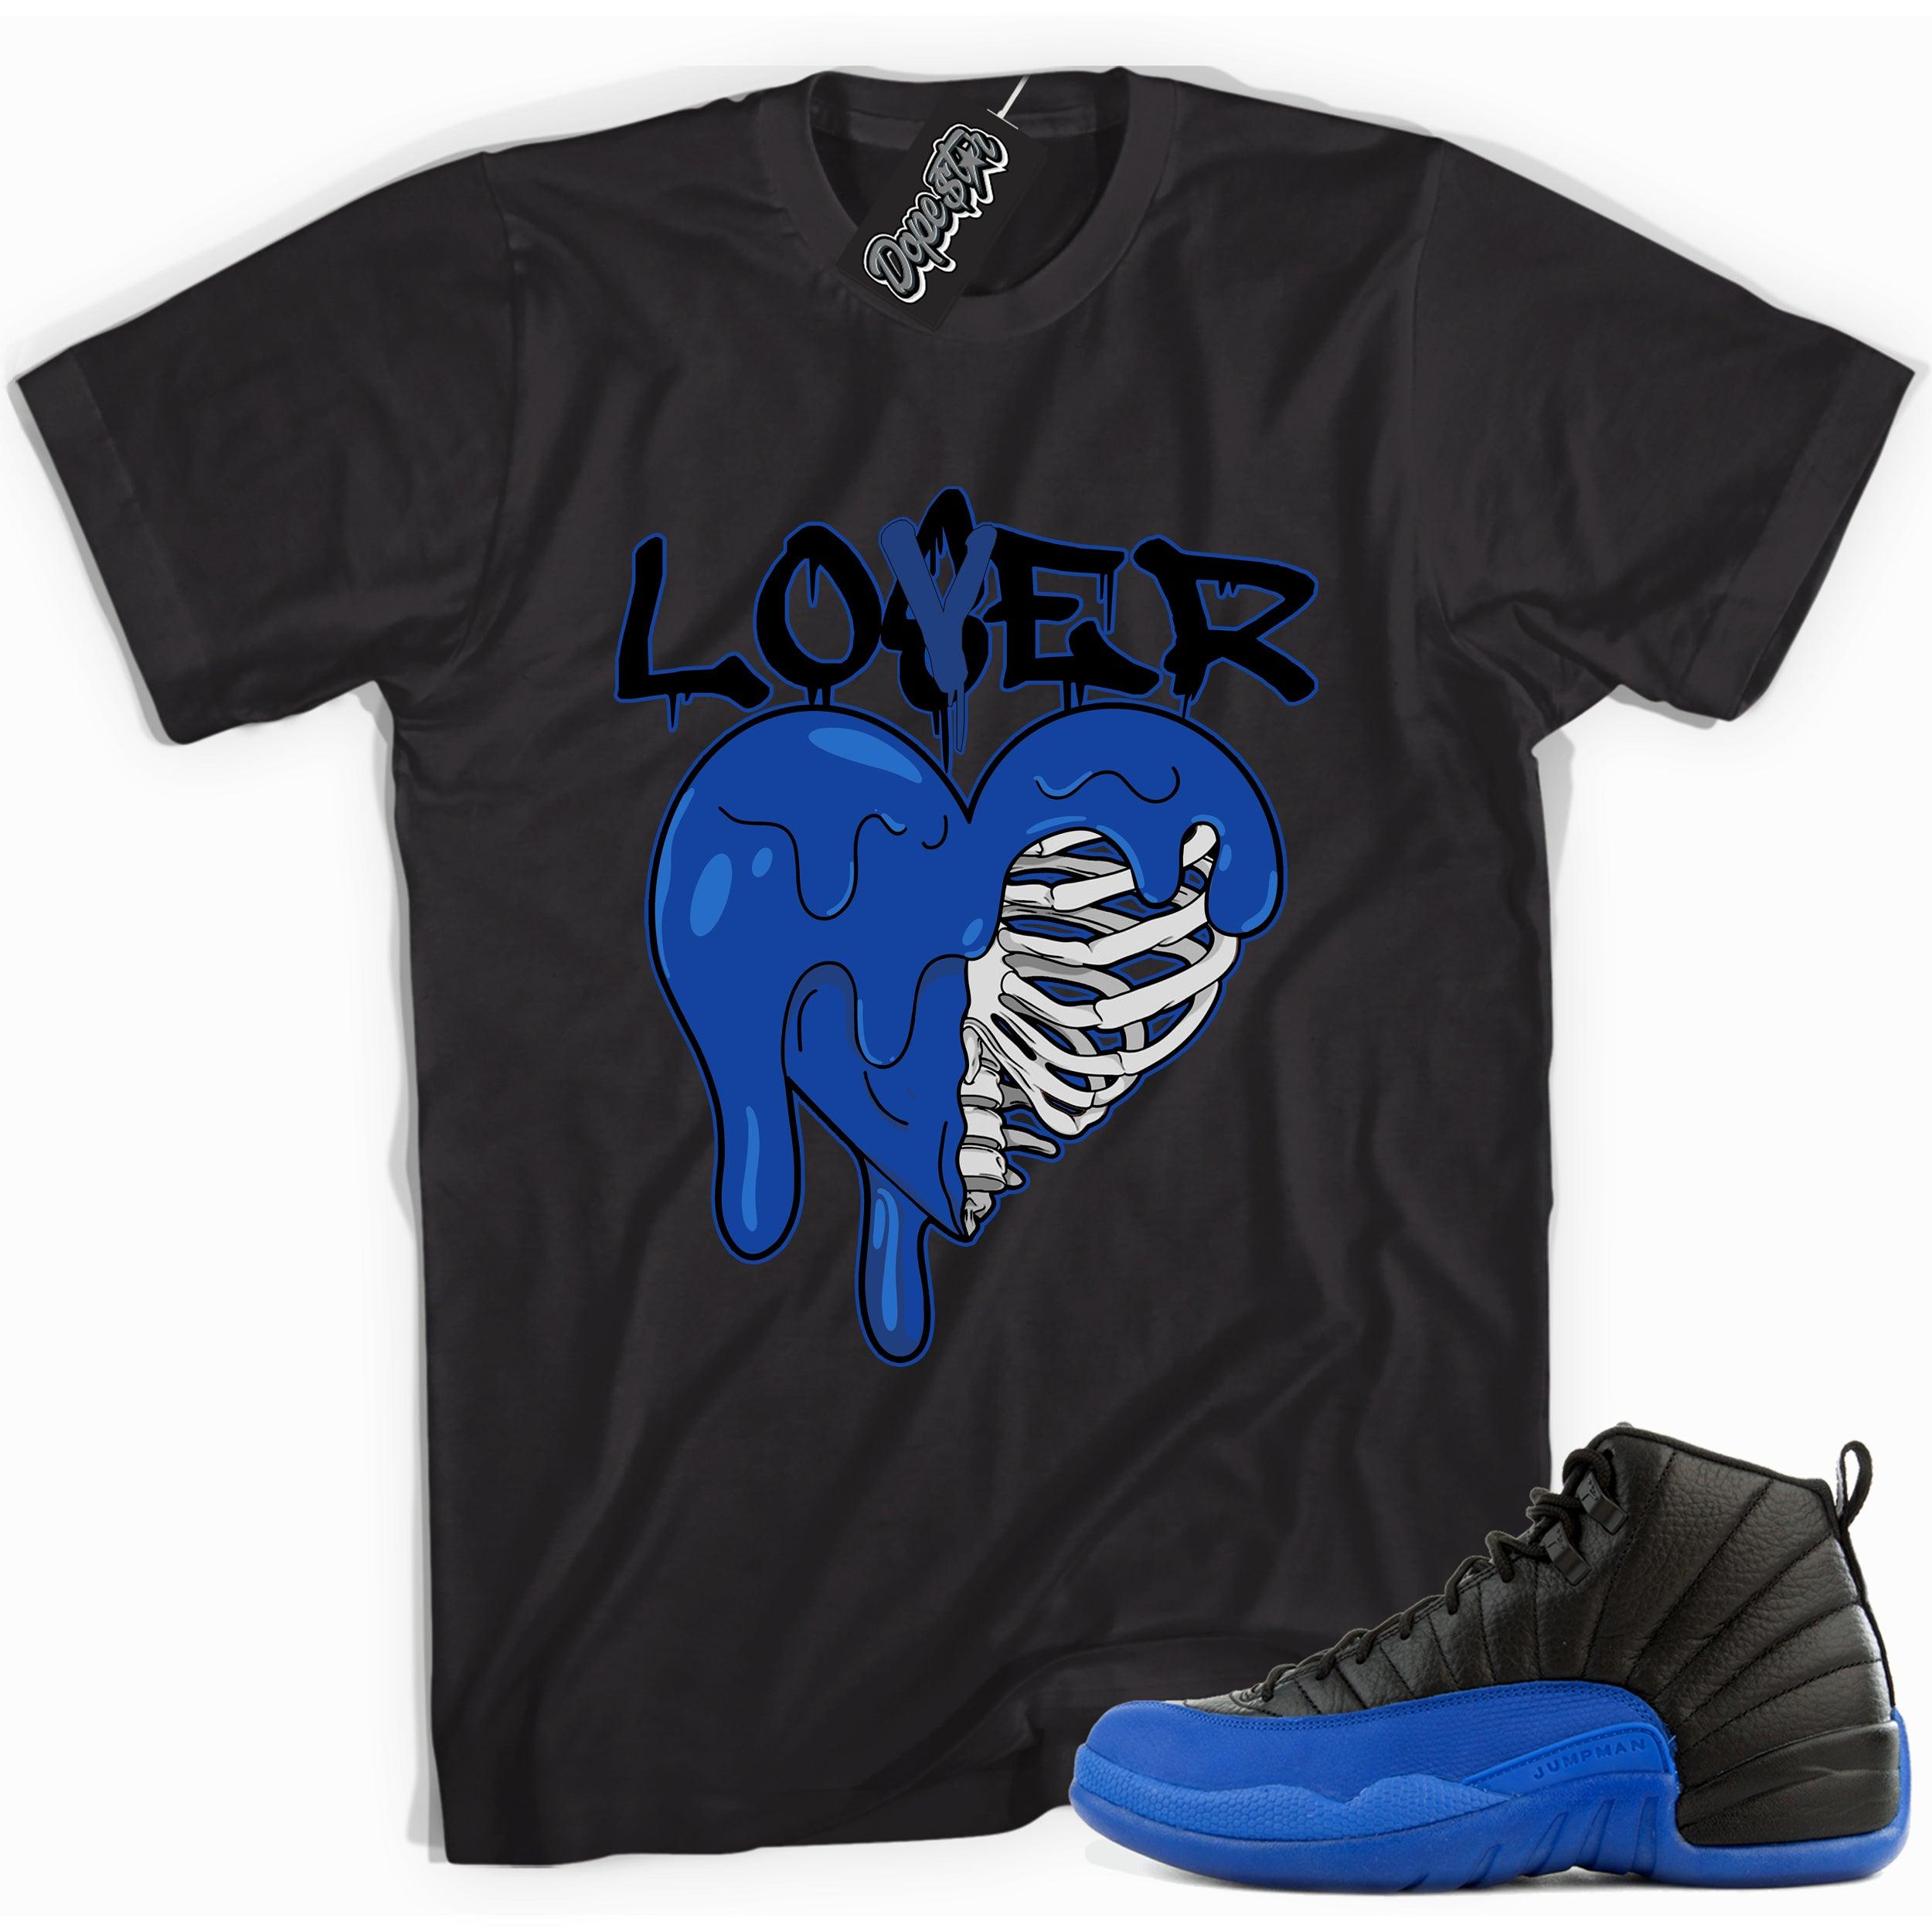 Cool black graphic tee with 'lover loser' print, that perfectly matches Air Jordan 12 Retro Black Game Royal sneakers.